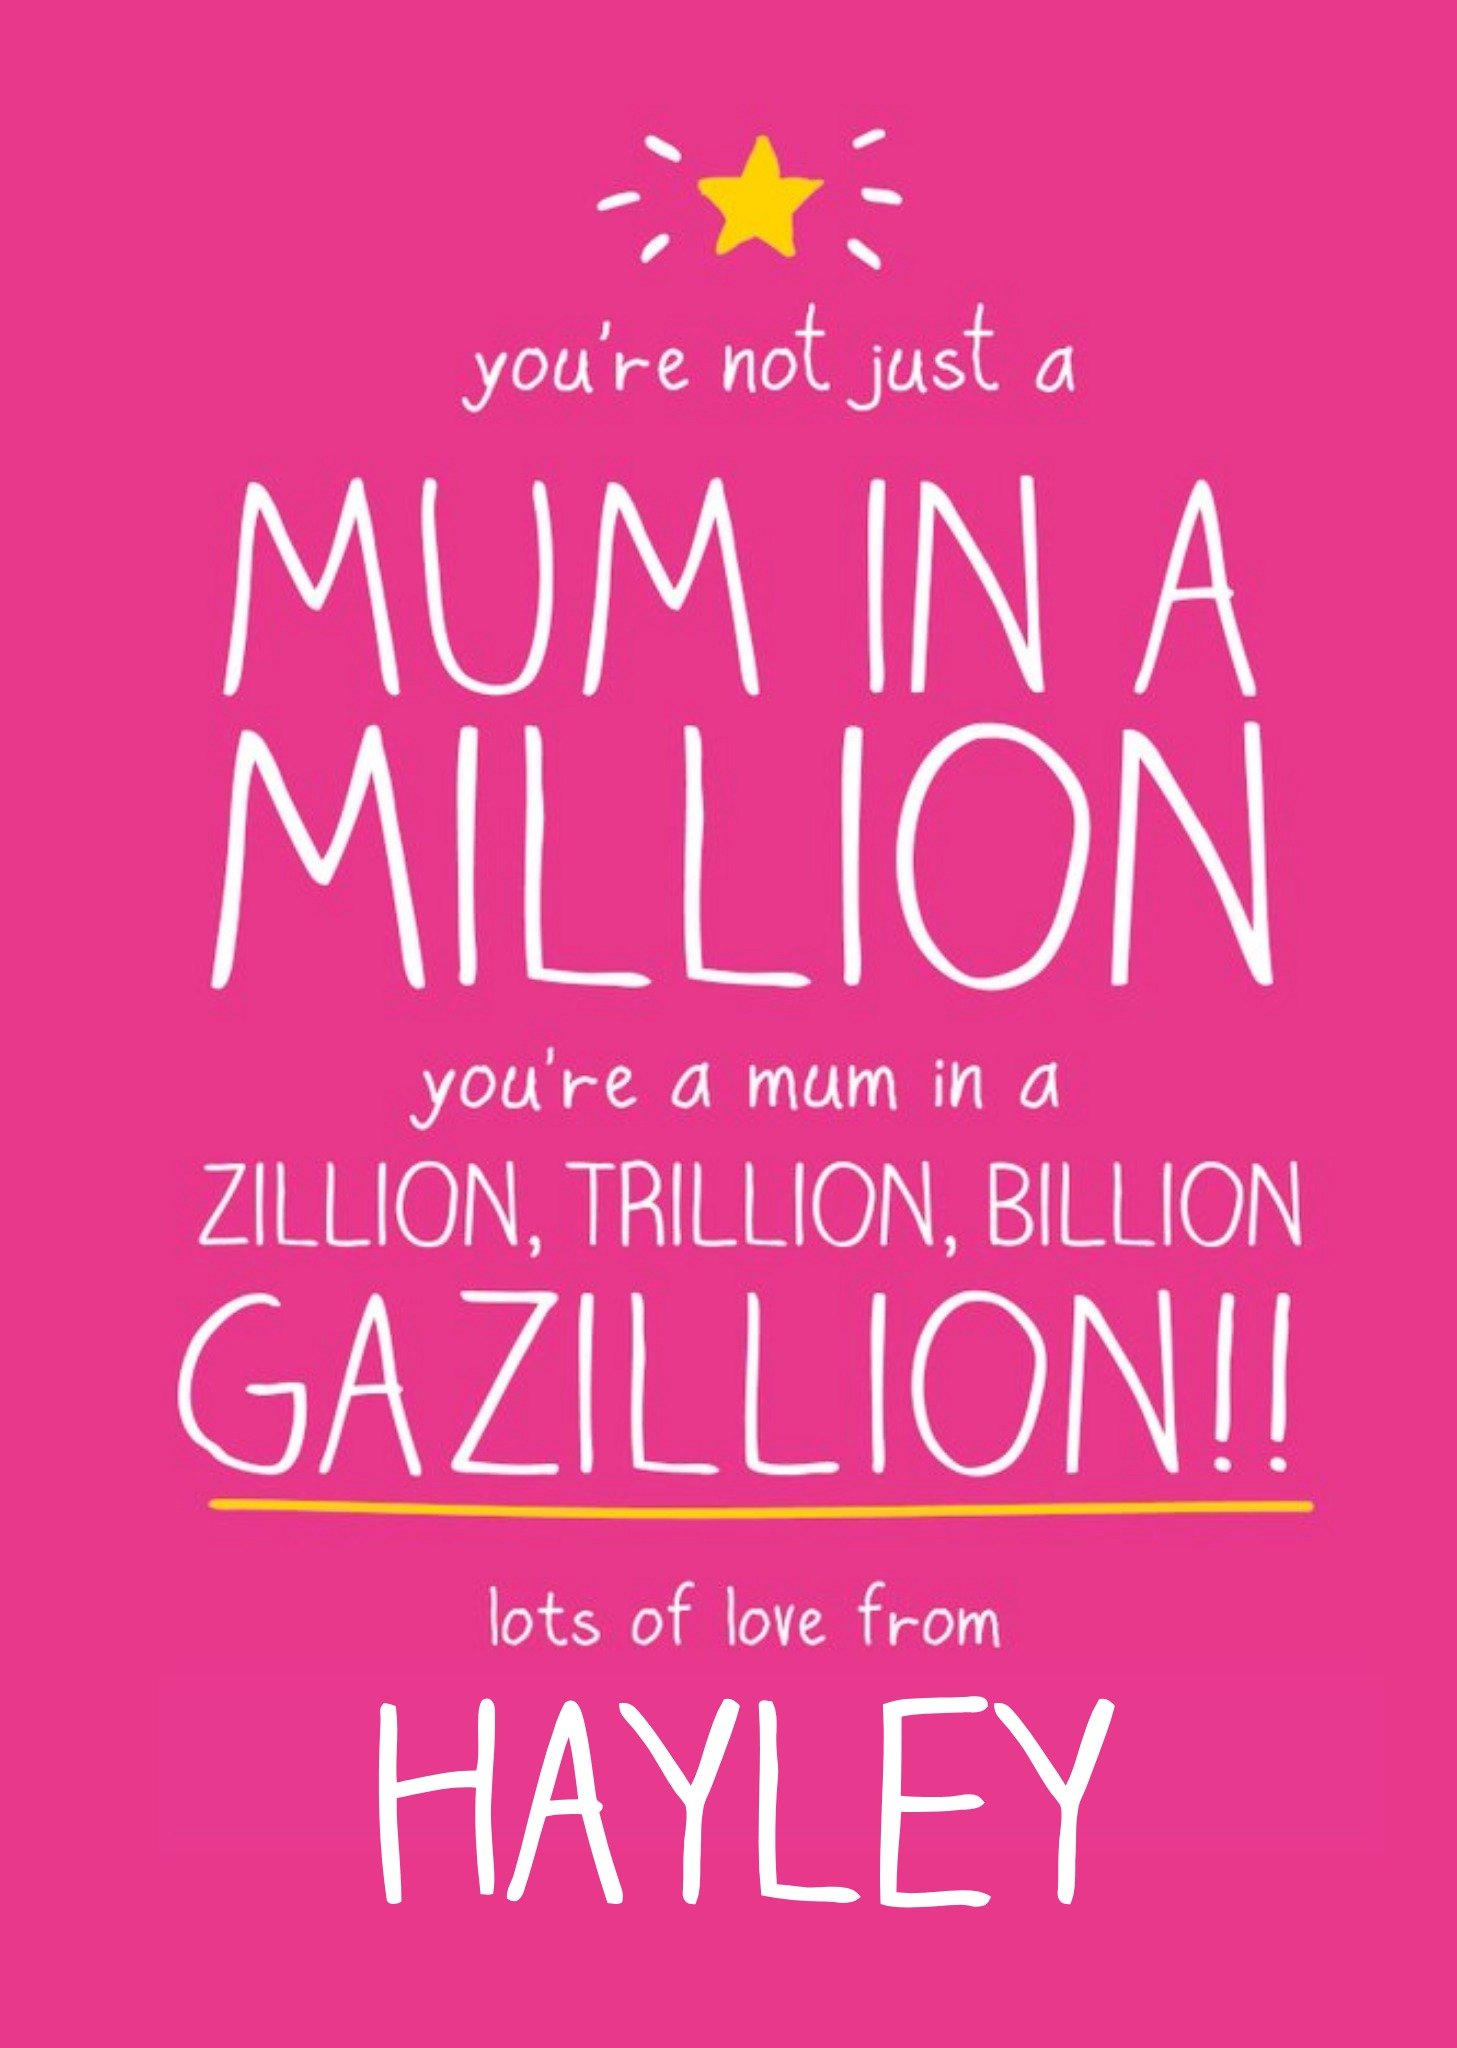 Happy Jackson Mum In A Gazillion Personalised Happy Mother's Day Card Ecard